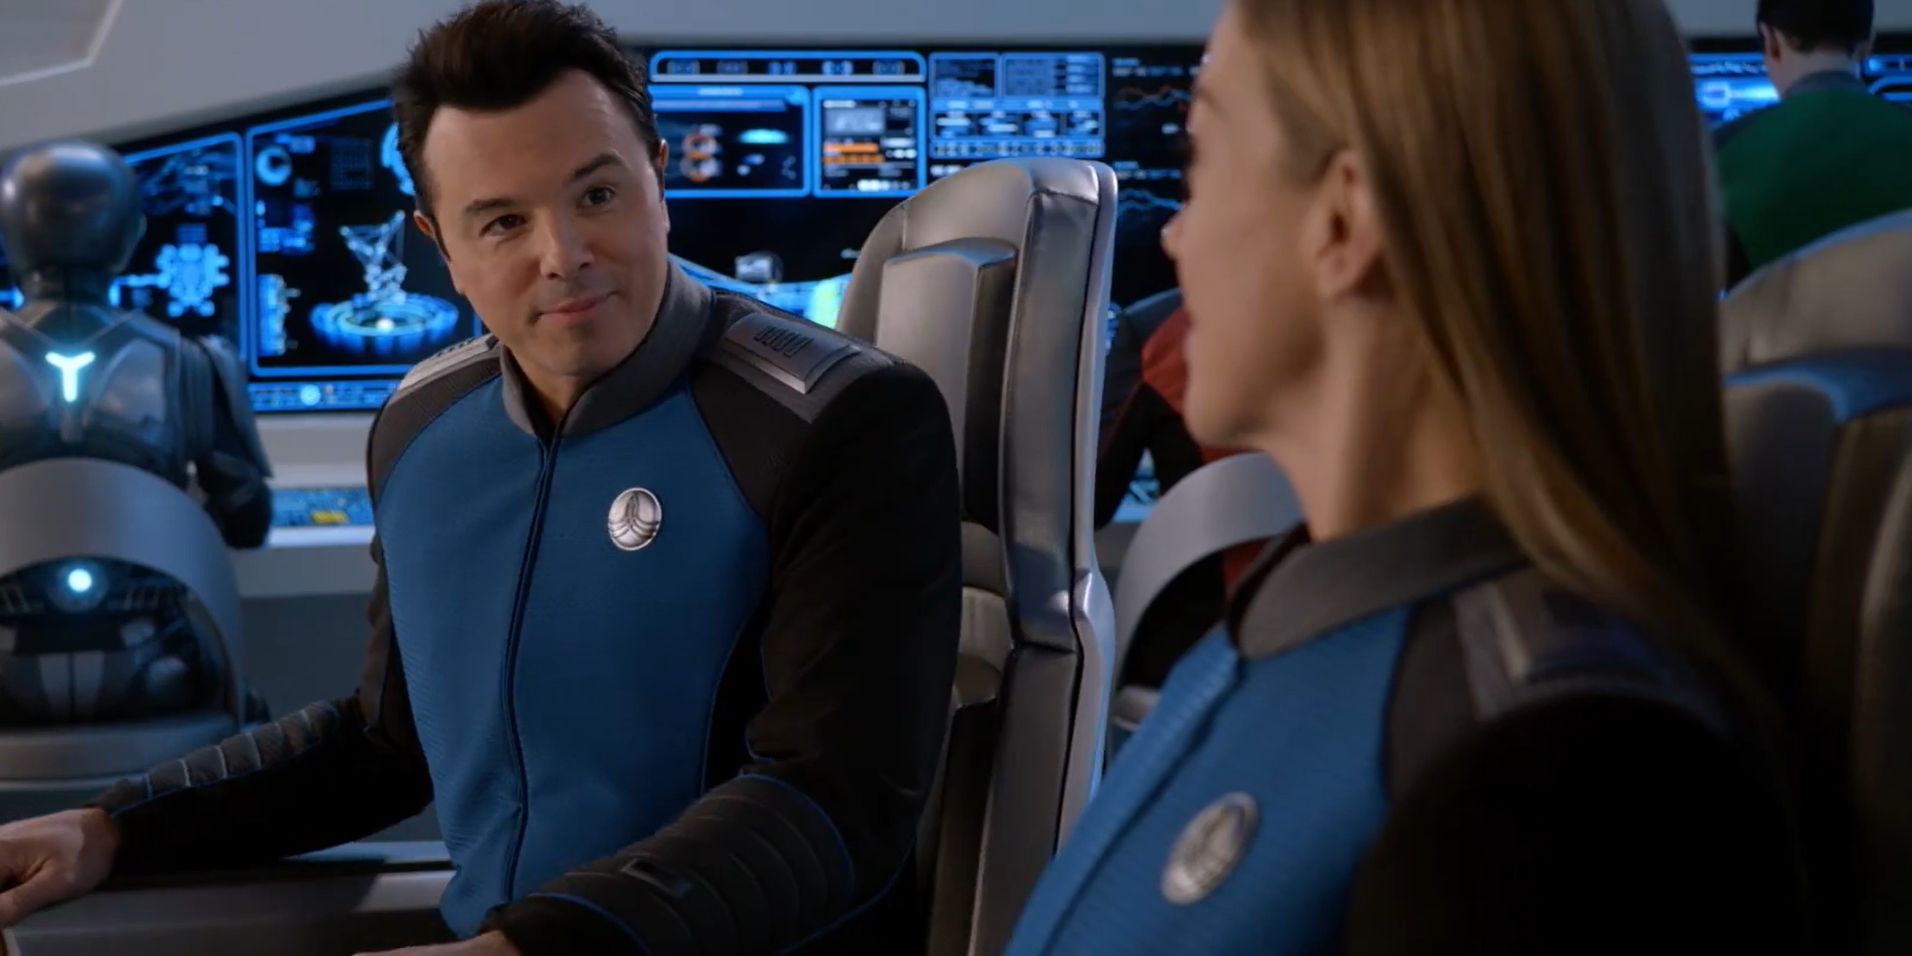 Seth McFarlane and Adrianne Palicki seated on the bridge in The Orville